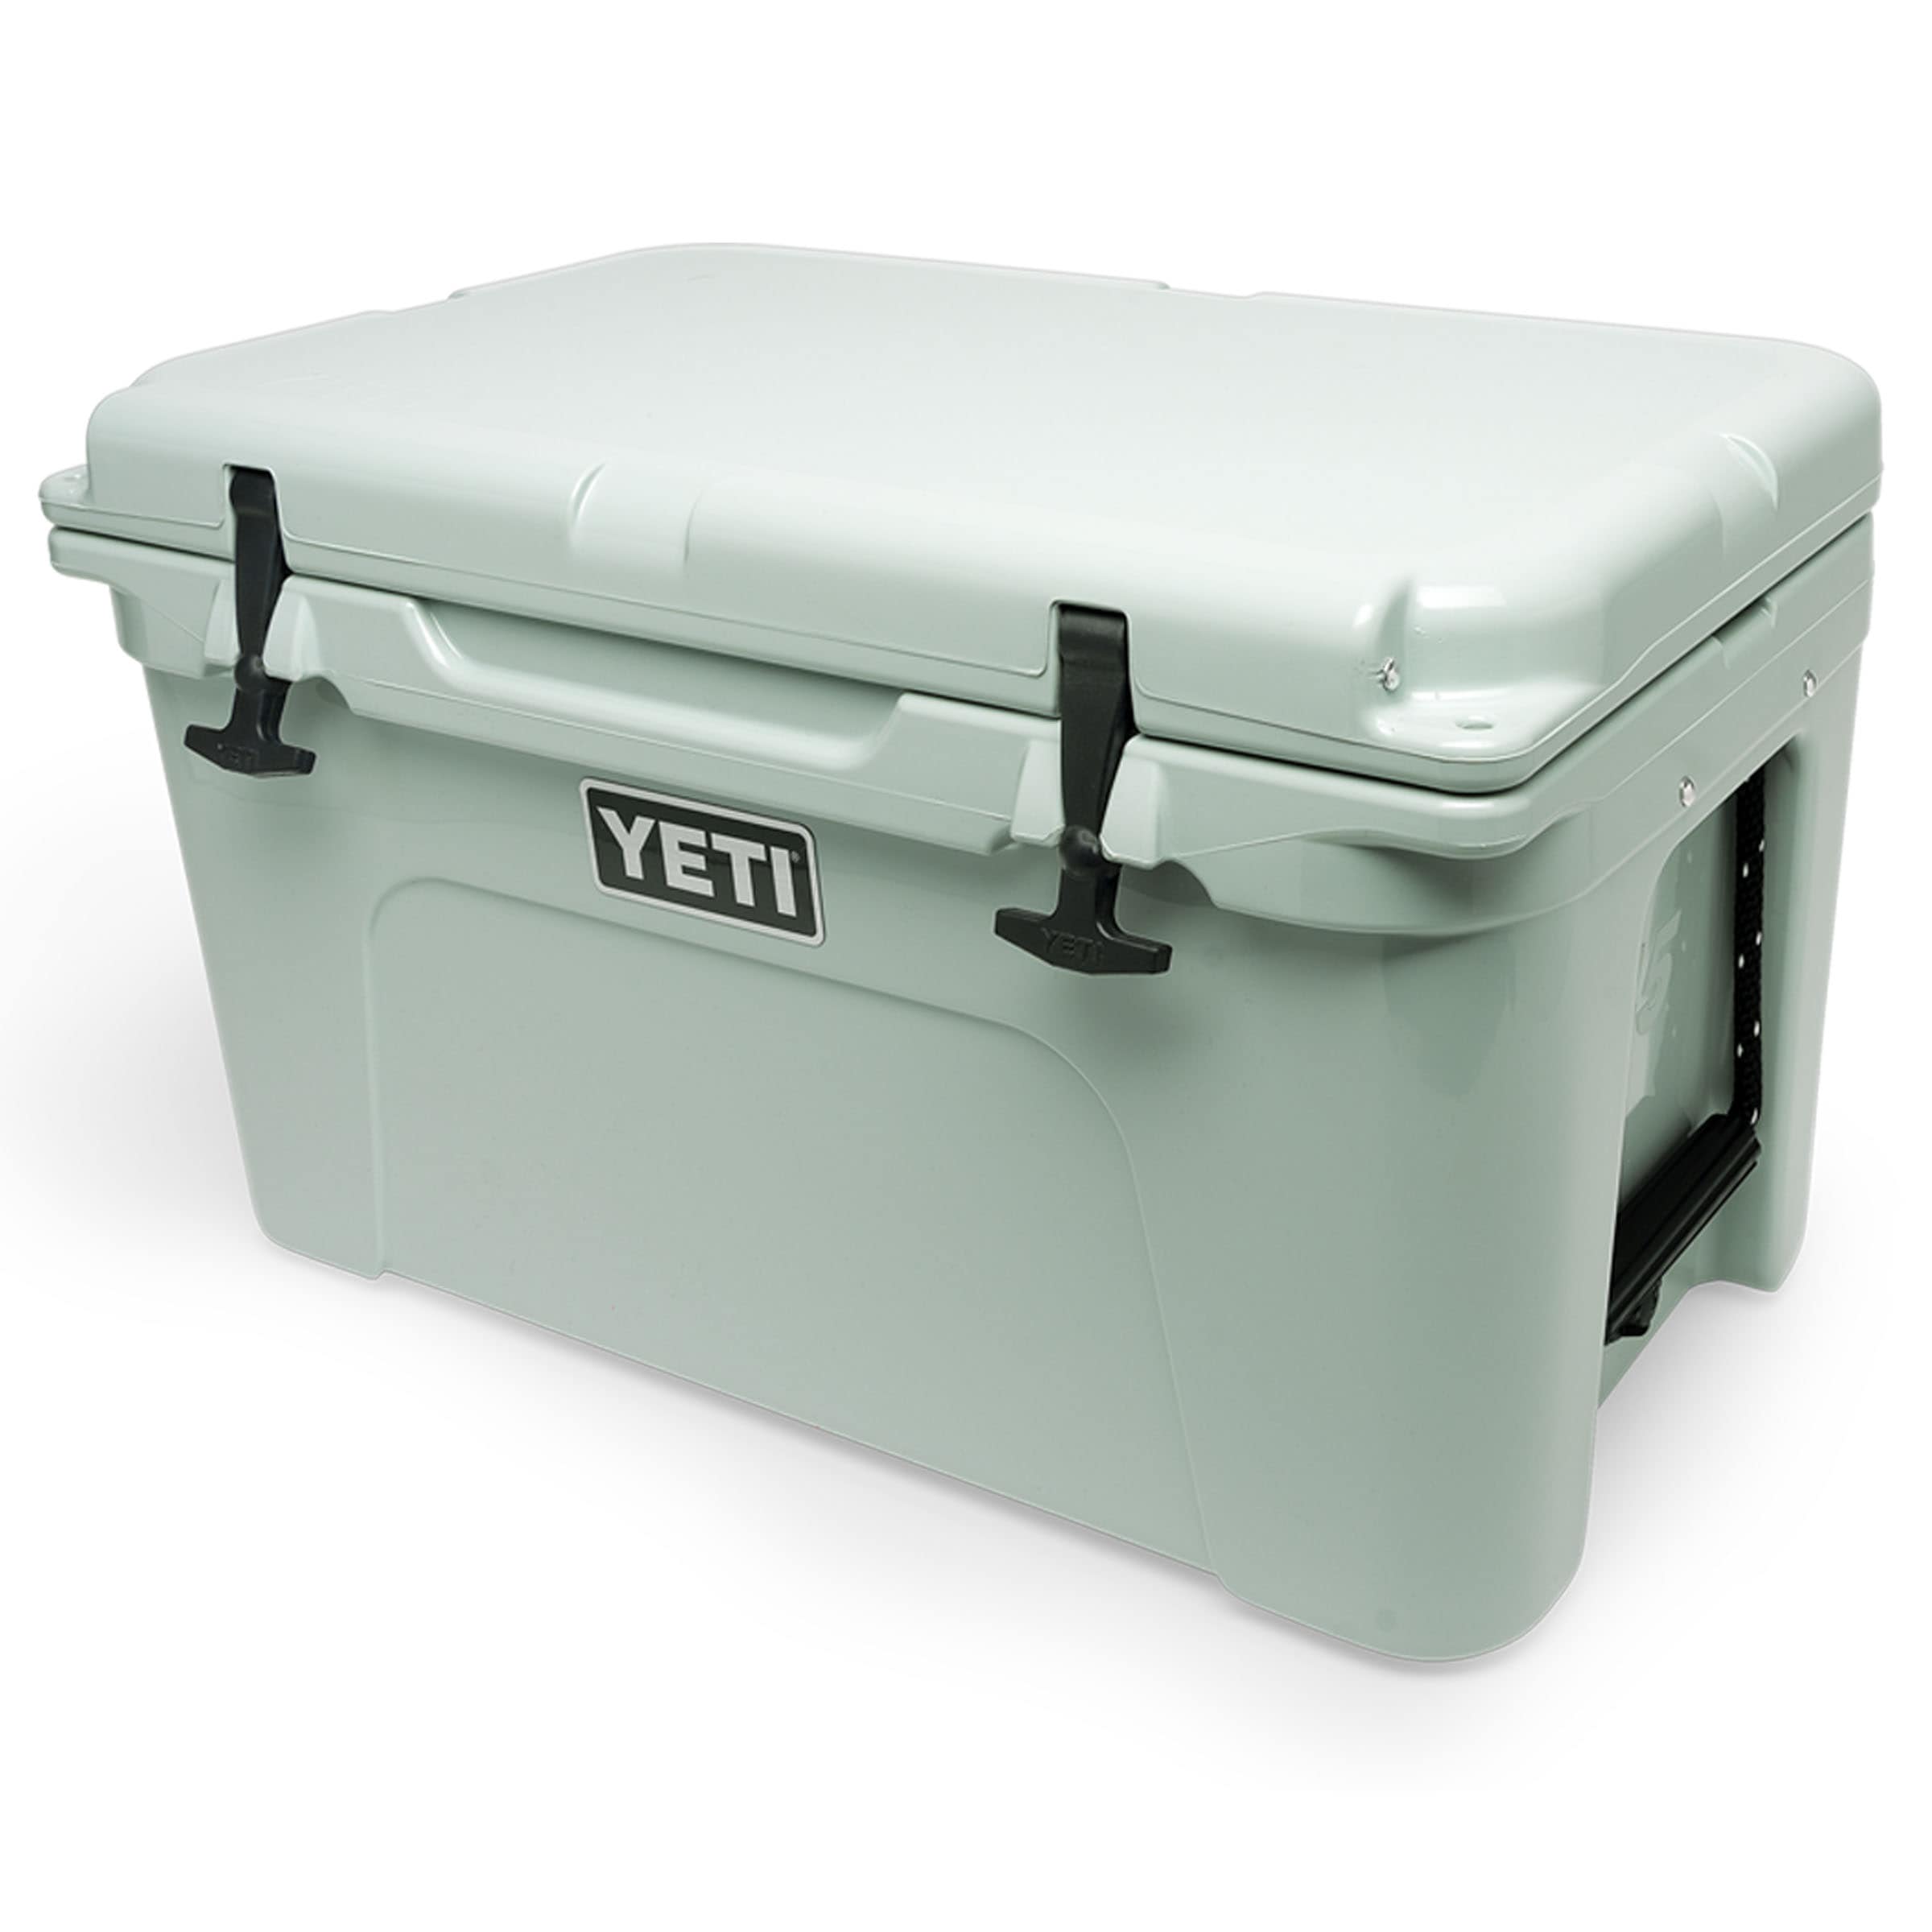 New Yeti Cooler Comes With Built-in Blender - Plus a solar panel, iPad mini,  toaster, tape measure--and breathalyzer - Men's Journal